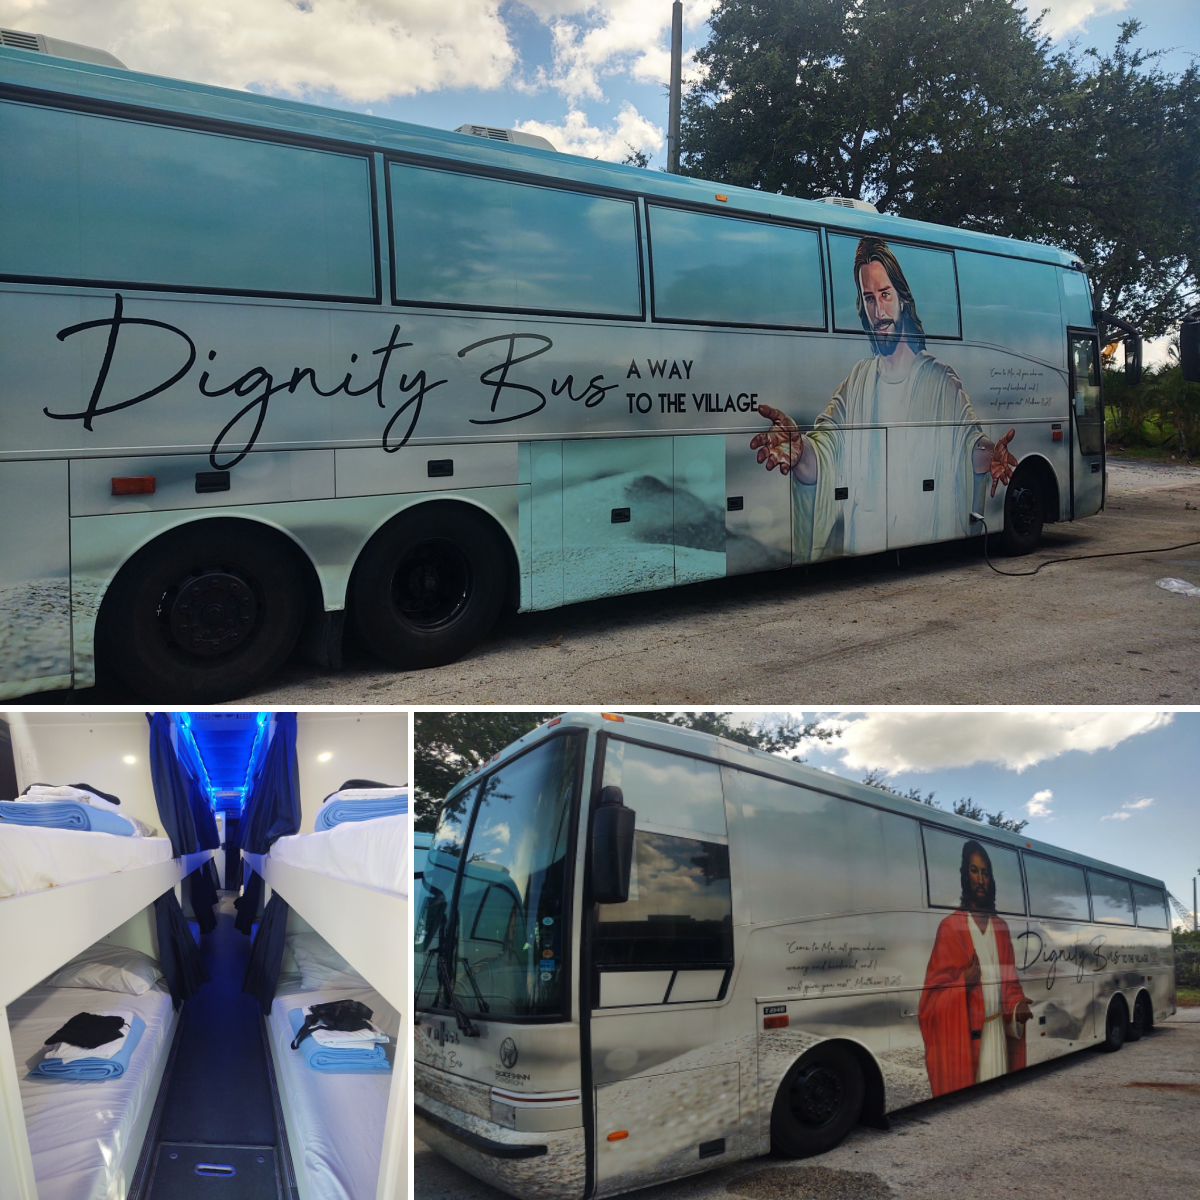 Dignity Bus, Palm Bay